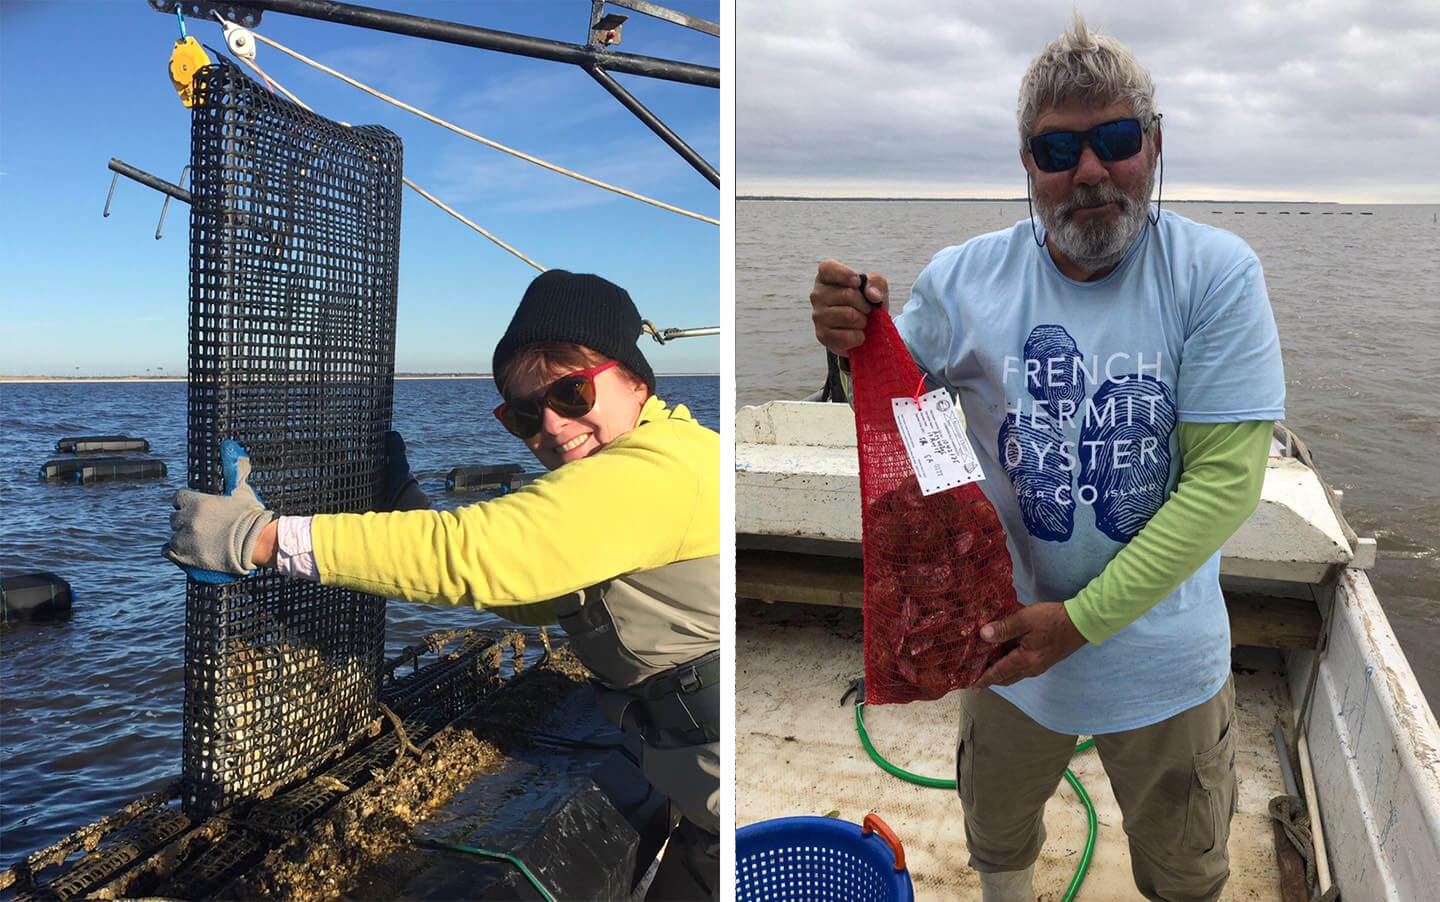 Left, Anita Arguelles empties a bag of growing oysters into a floating cage in the Mississippi Sound. Right, TK Arguelles totes a bag of full-sized French Hermit oysters.